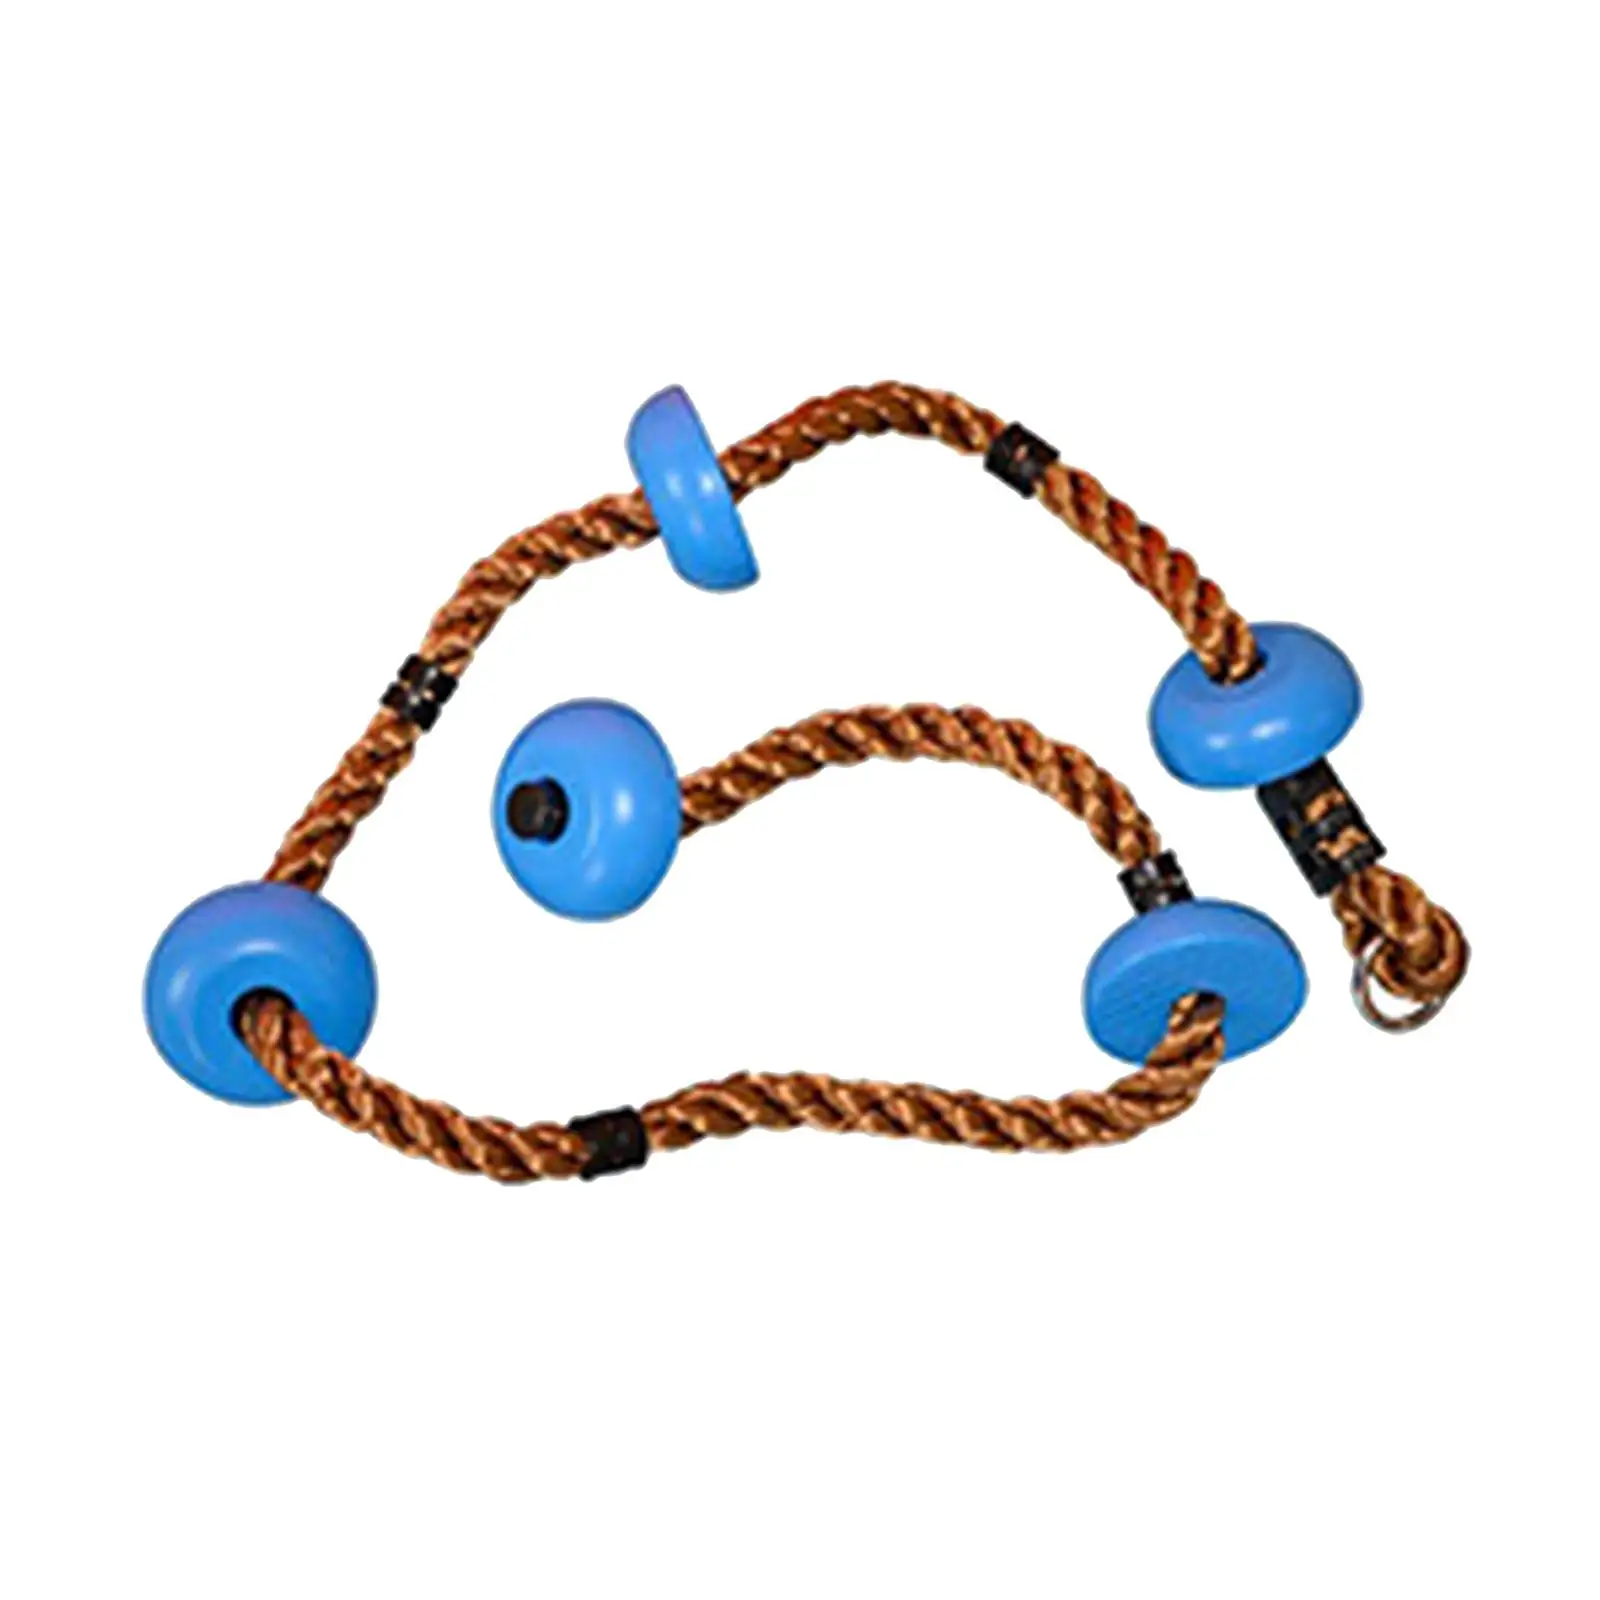 Climbing Rope Accessory with Disc Rope Ladder for Backyard Boys Girls Kids